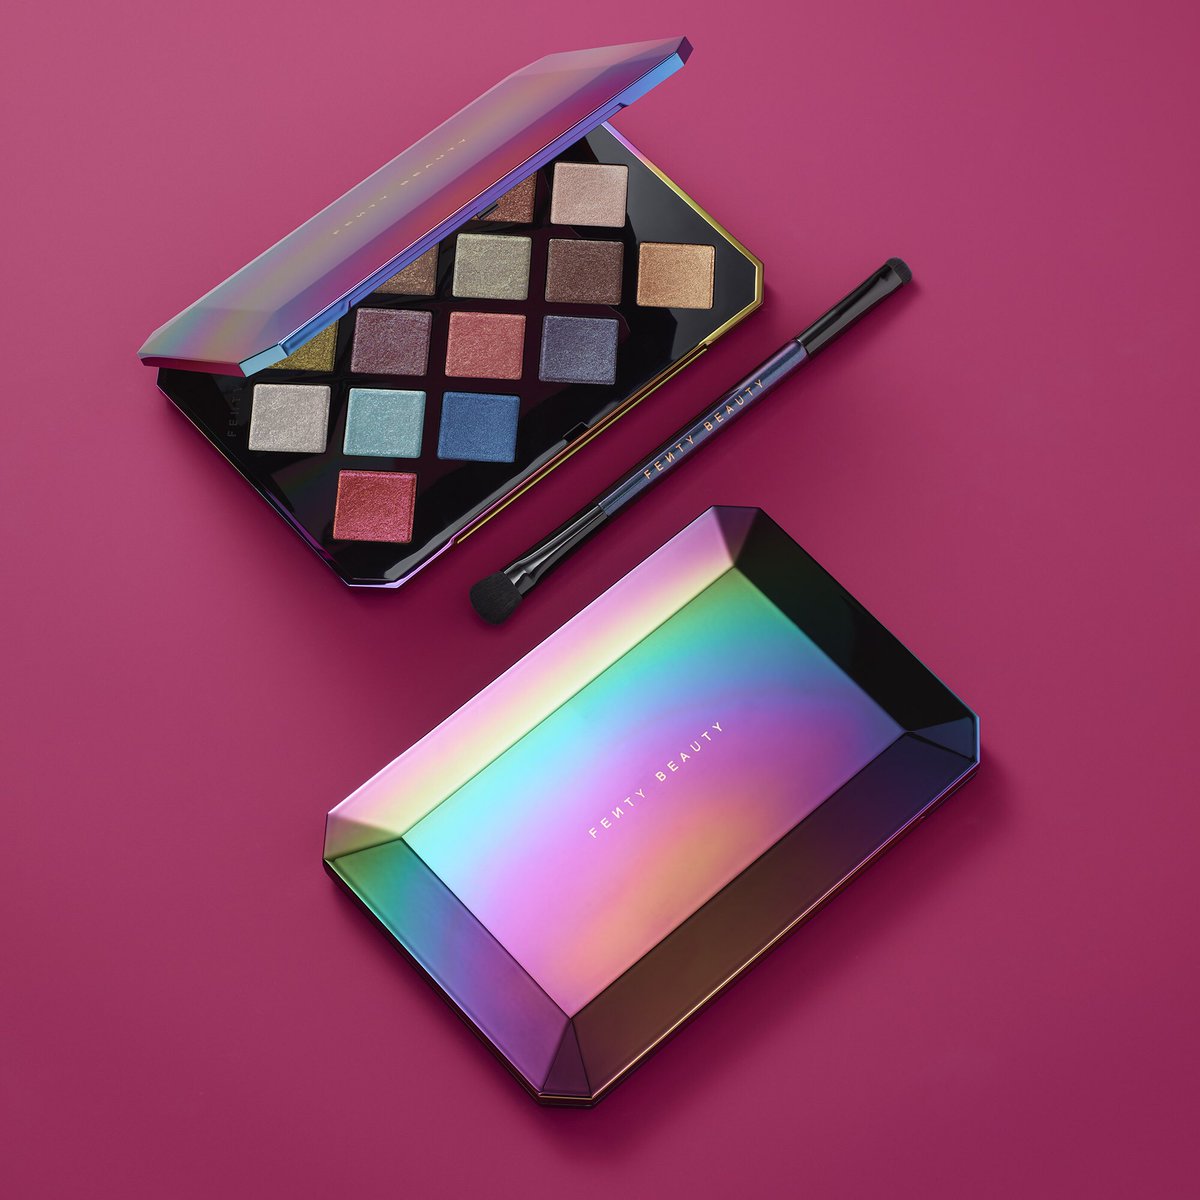 Galaxy Eyeshadow Palette. 
Im dying to hear what your favorite colors are... @fentybeauty https://t.co/FmPtp2px38